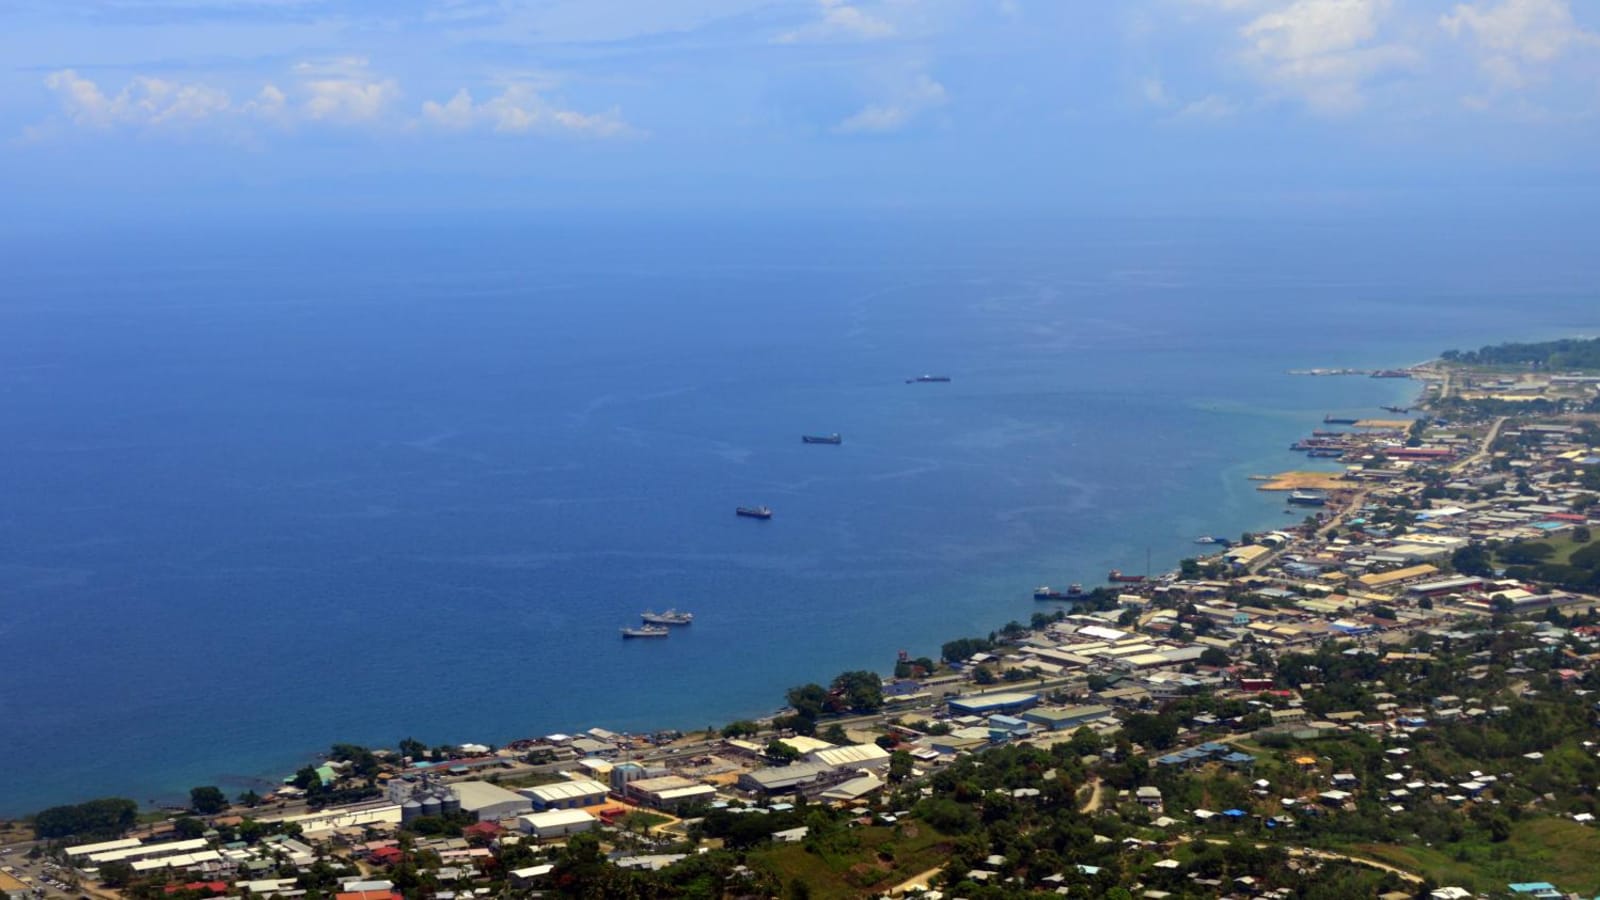 China boosts South Pacific influence with Solomon Islands port deal